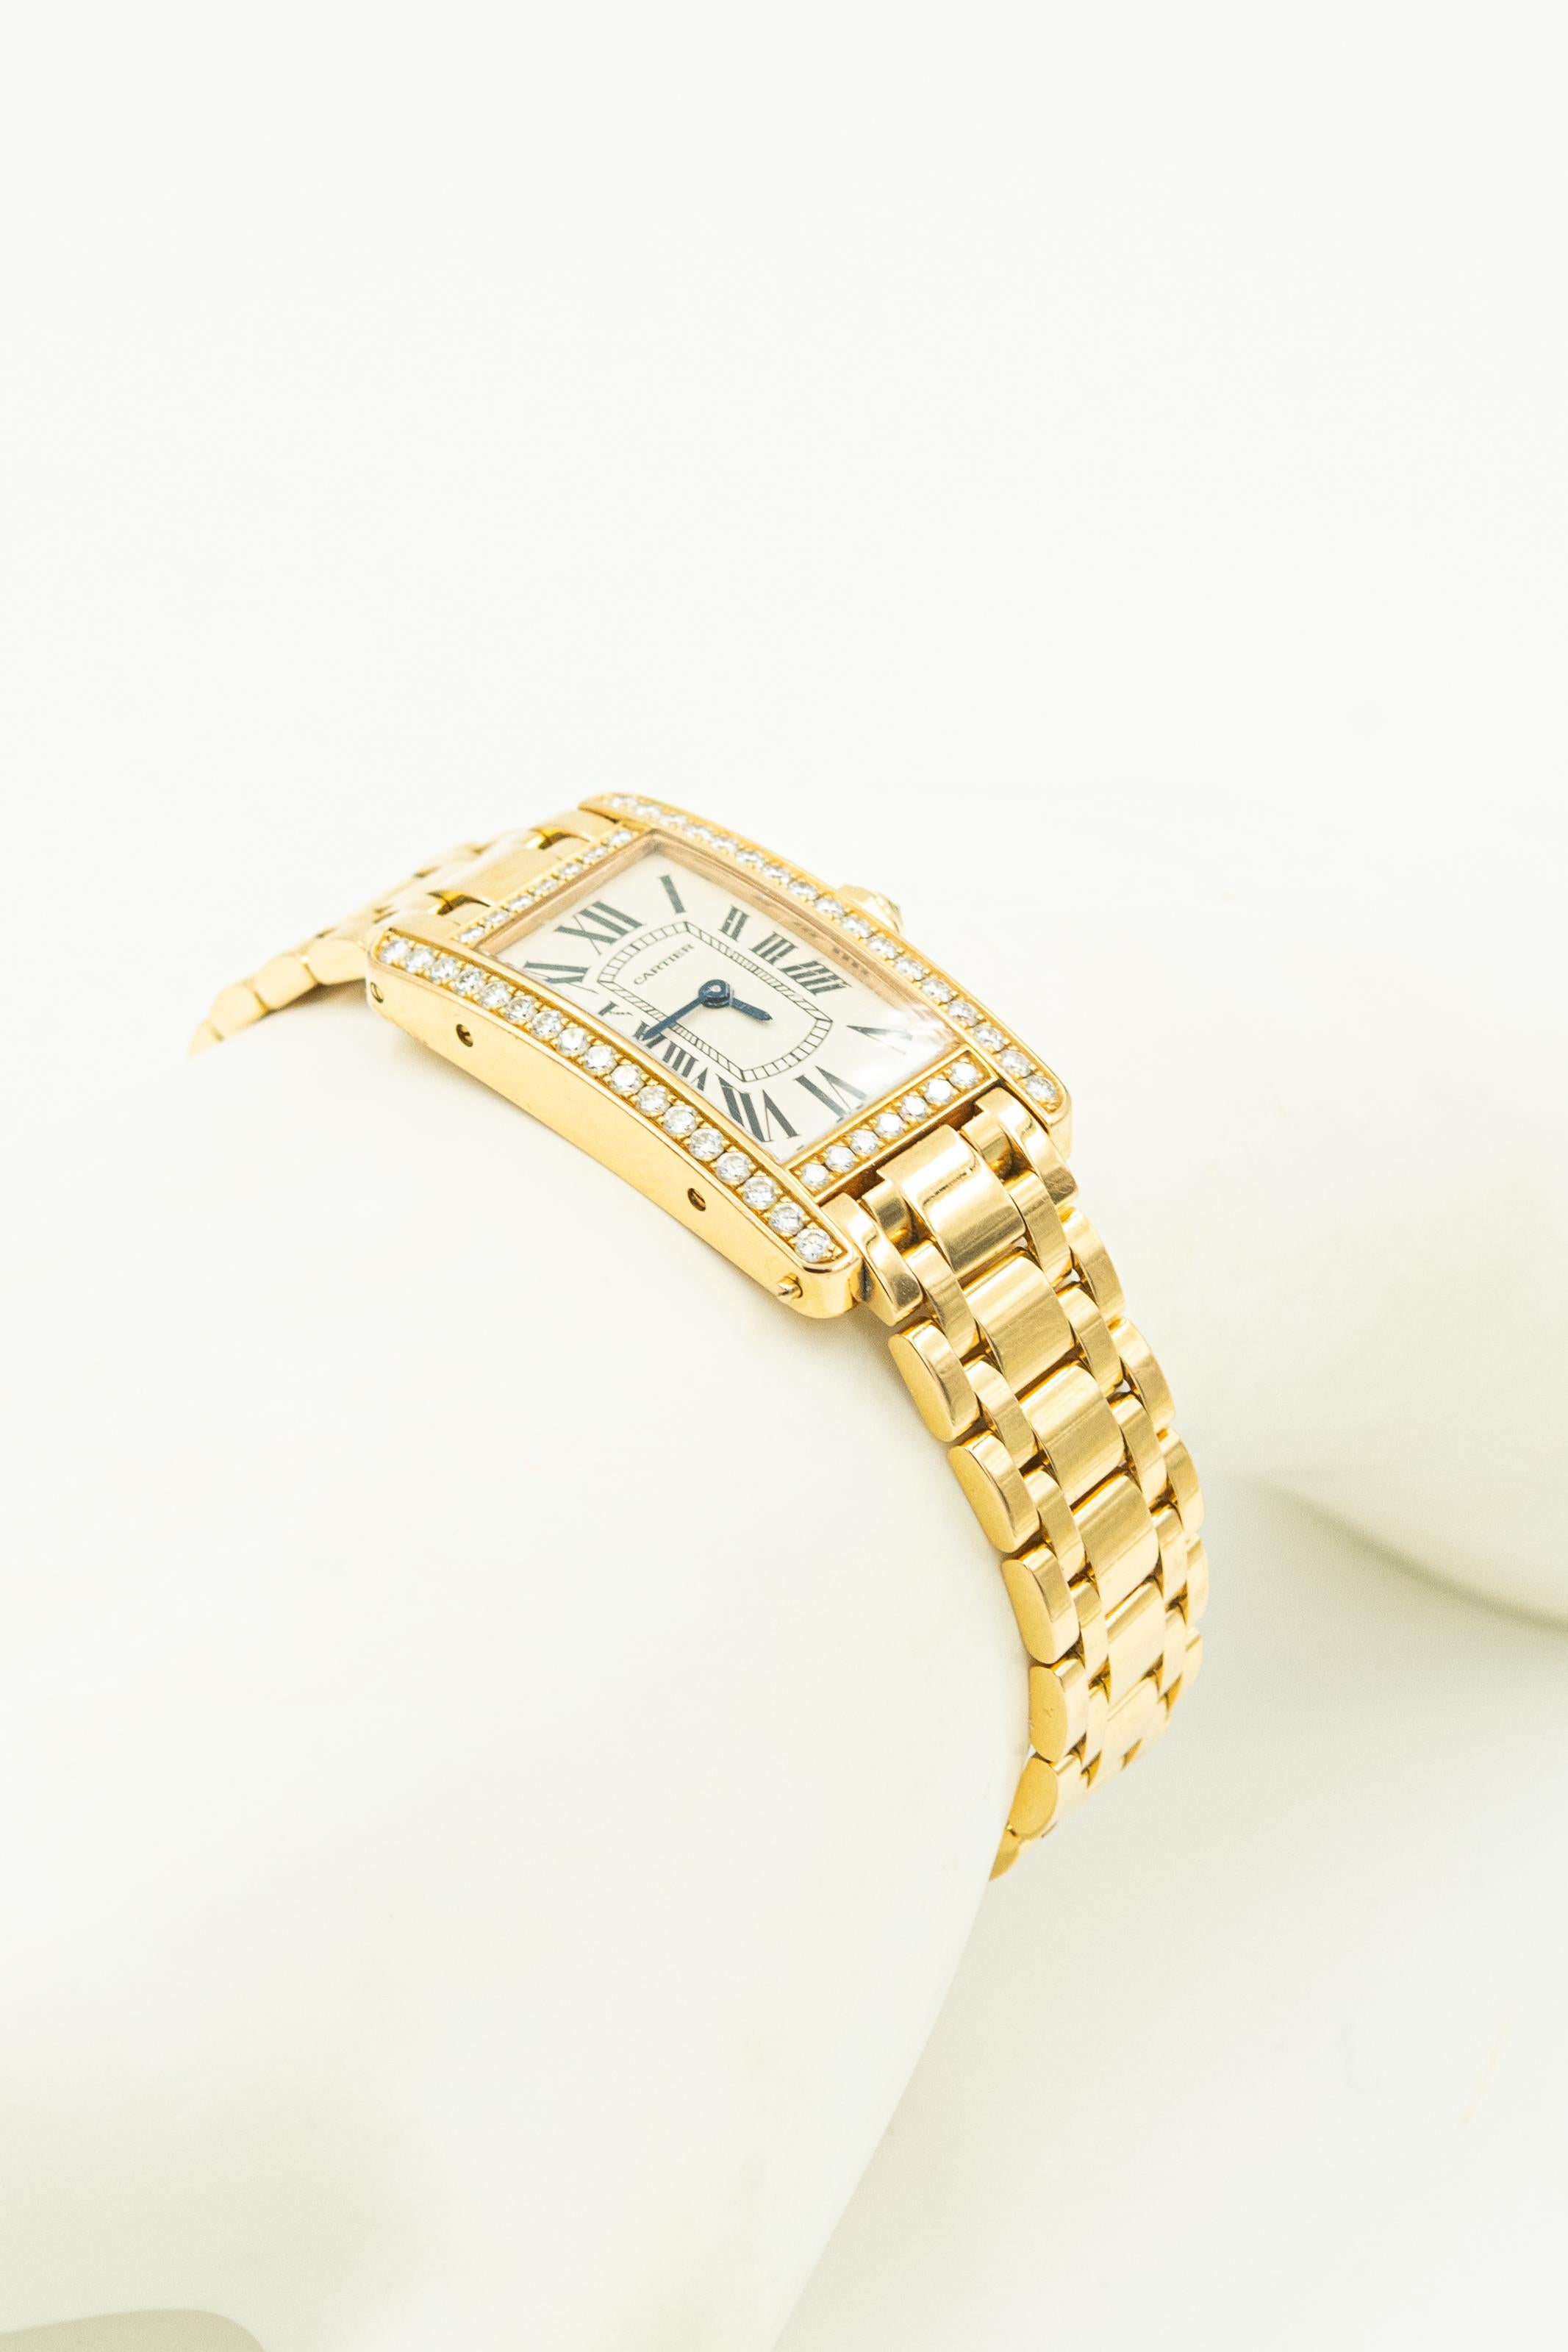 Cartier Ladies Tank Americane 18k Yellow Gold Ref. 2503 Serial 9903CE bezel framed with 48 round brilliant diamonds in bezel and a sapphire crystal. It has a dual clasp 18k yellow gold bracelet.
Movement: Swiss quartz
Measurements: 19mm X 25mm (35mm